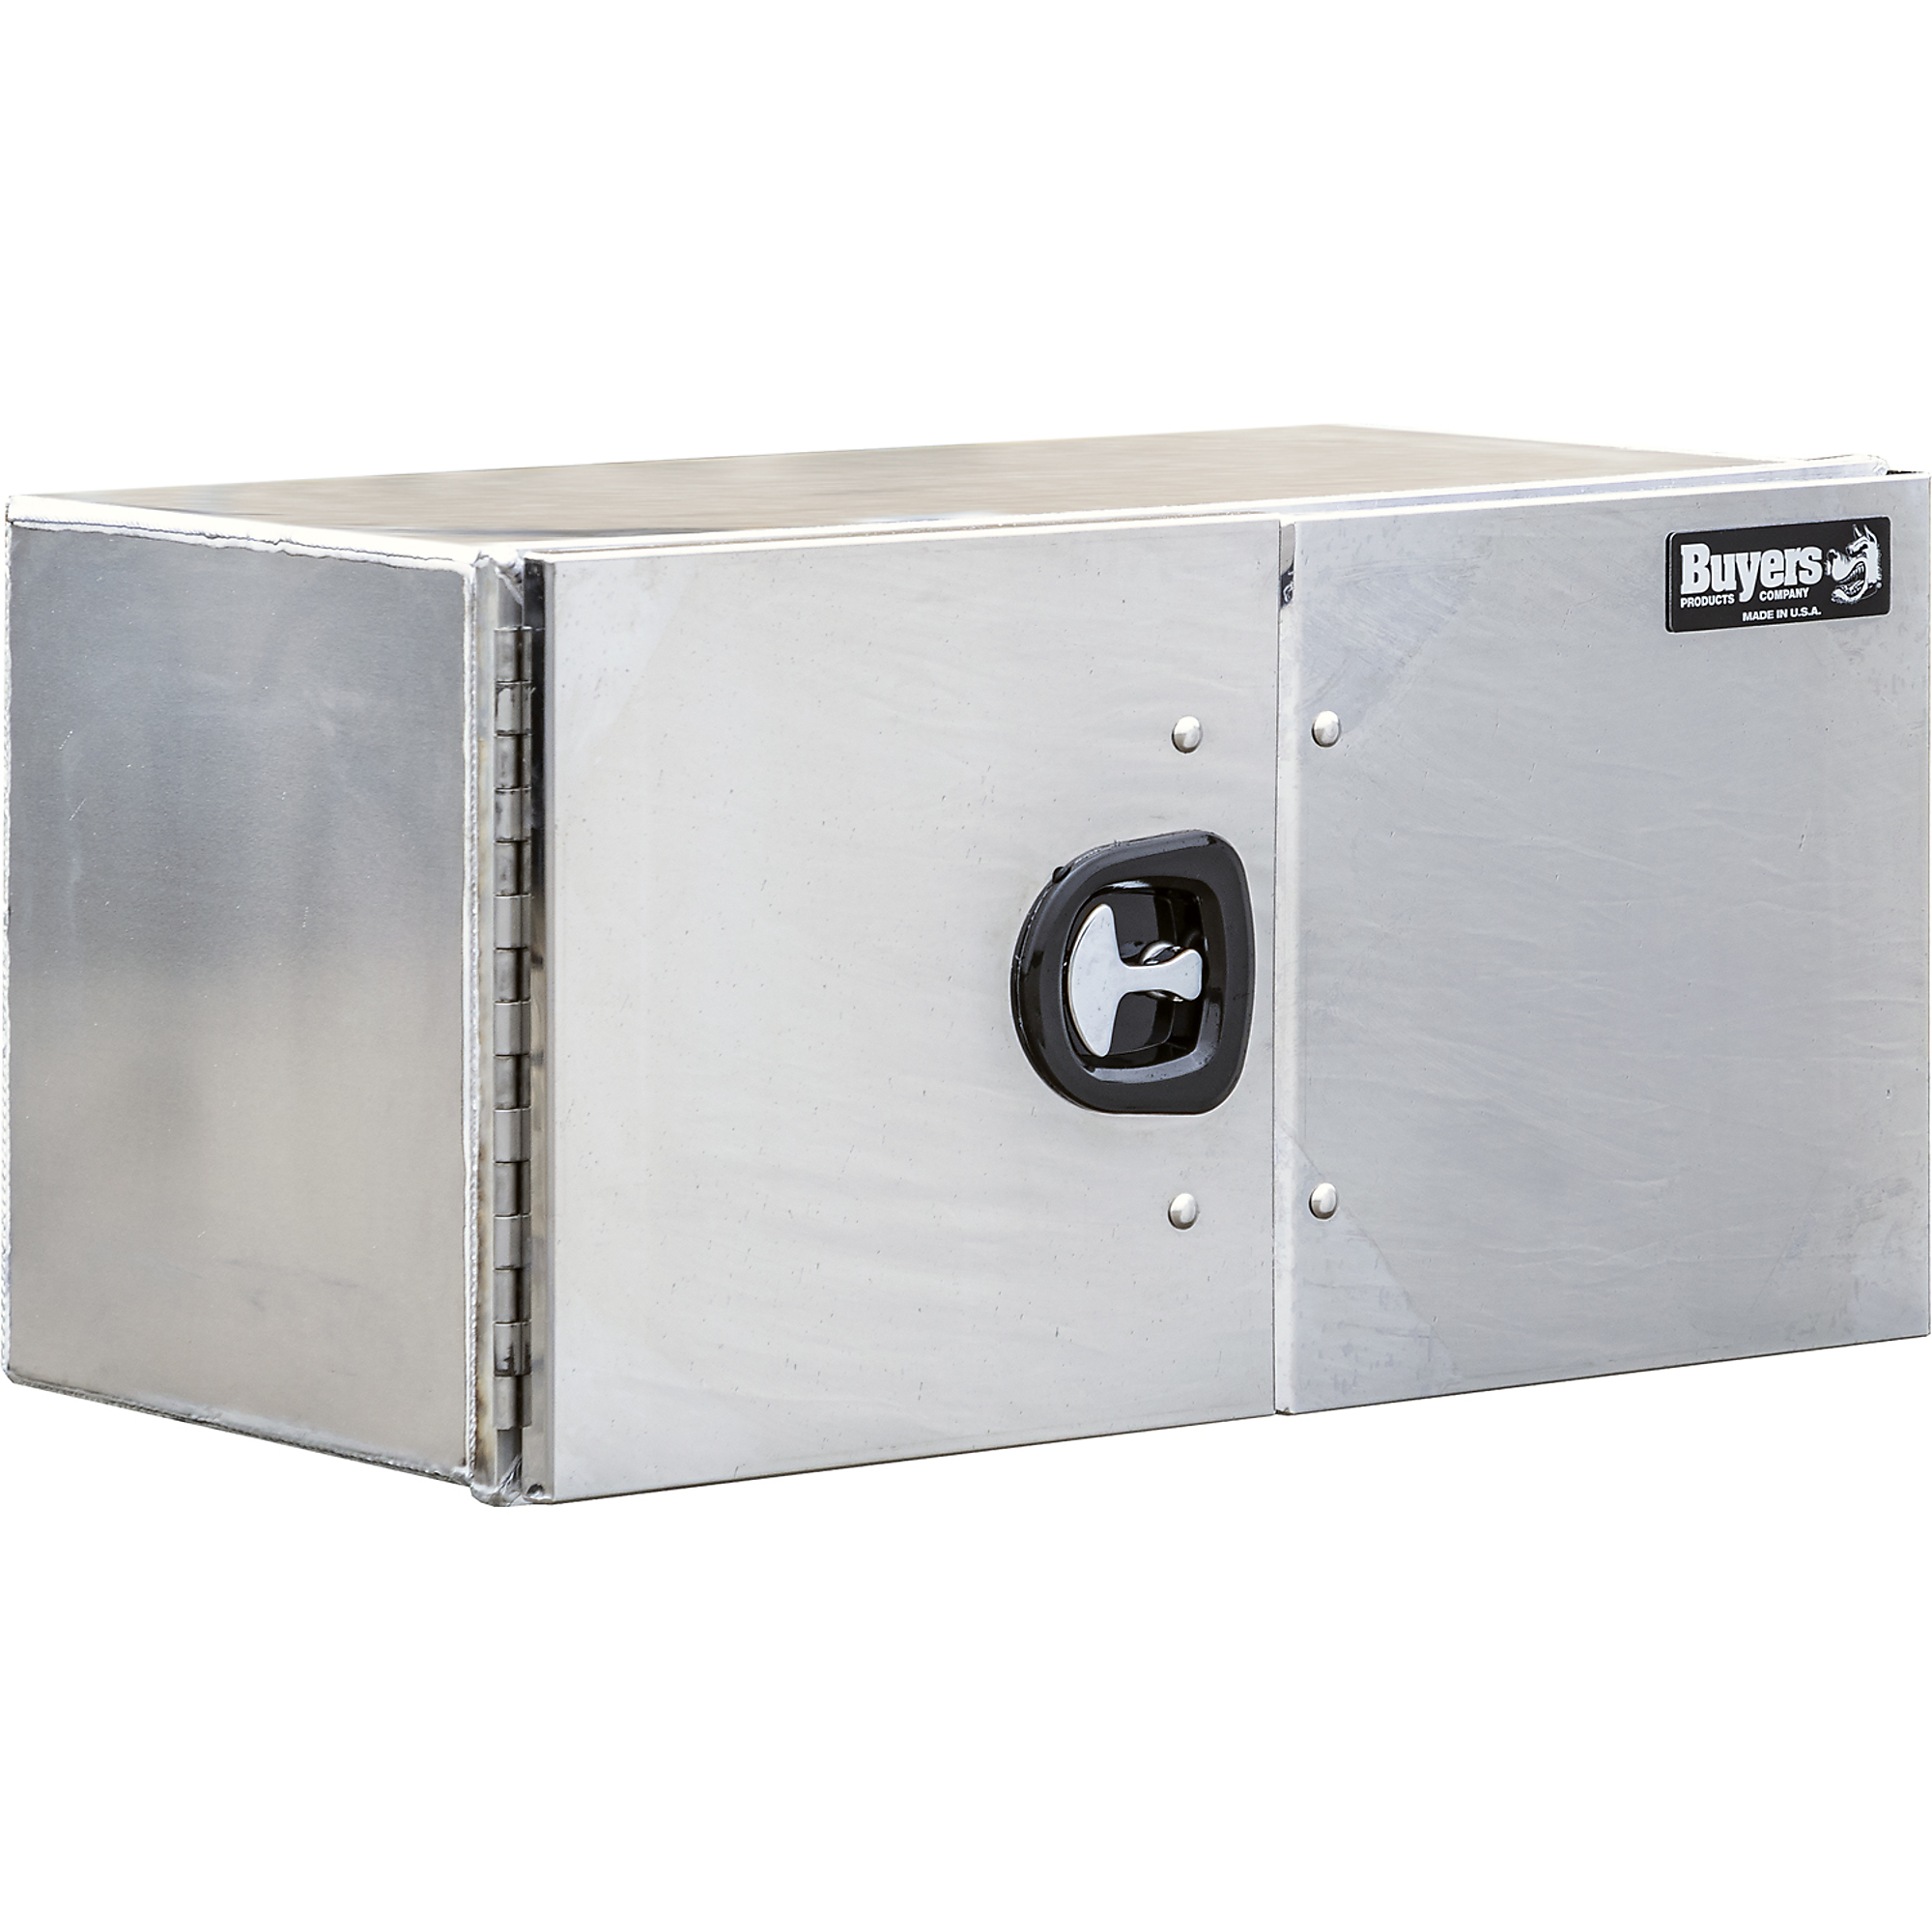 Buyers Products, 18x18x36 Aluminum Barn Door Underbody Truck Box, Width 18 in, Material Aluminum, Color Finish Smooth Silver, Model 1705510